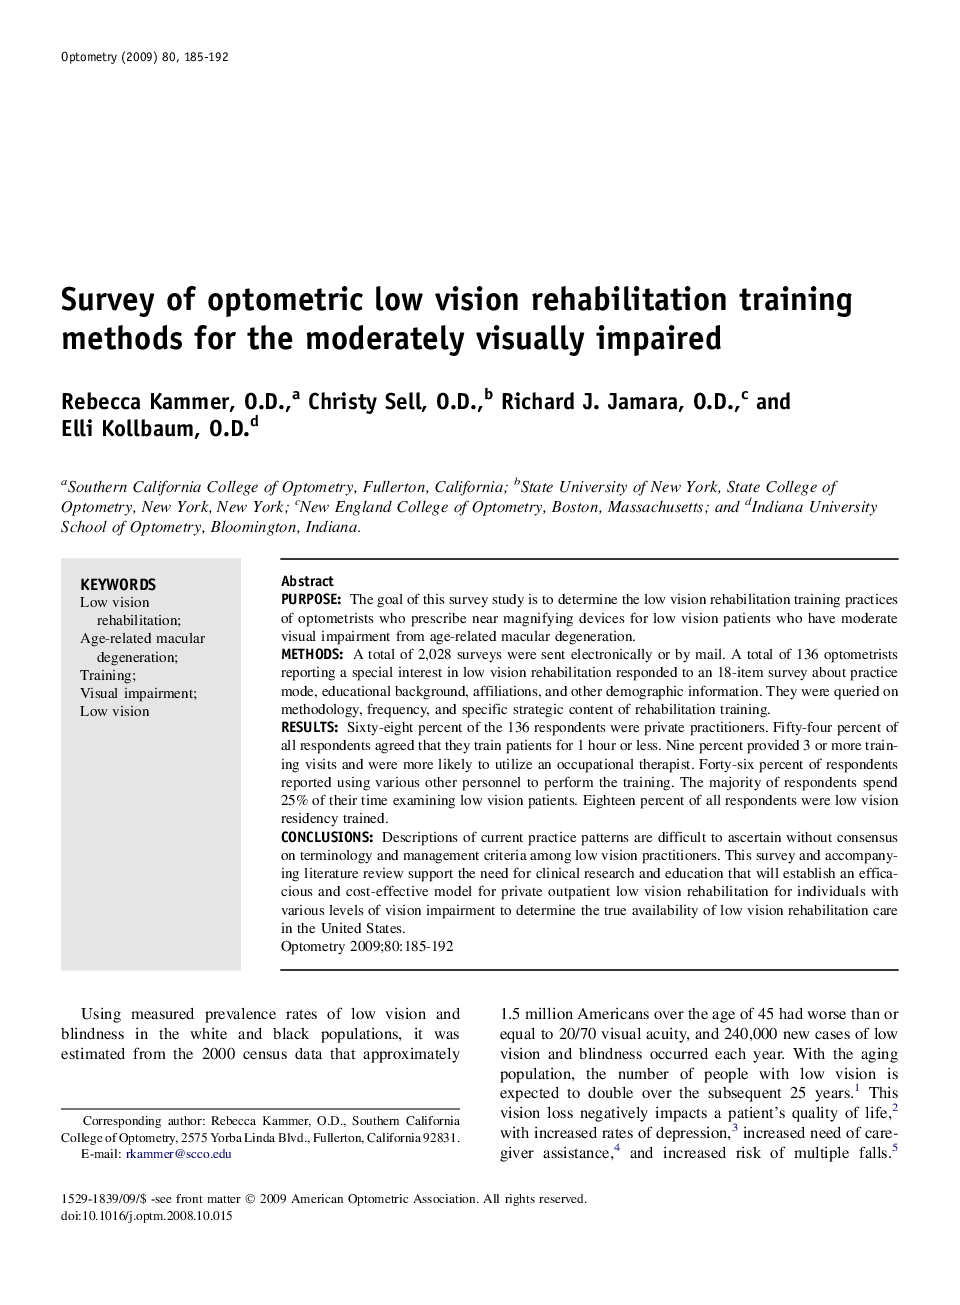 Survey of optometric low vision rehabilitation training methods for the moderately visually impaired